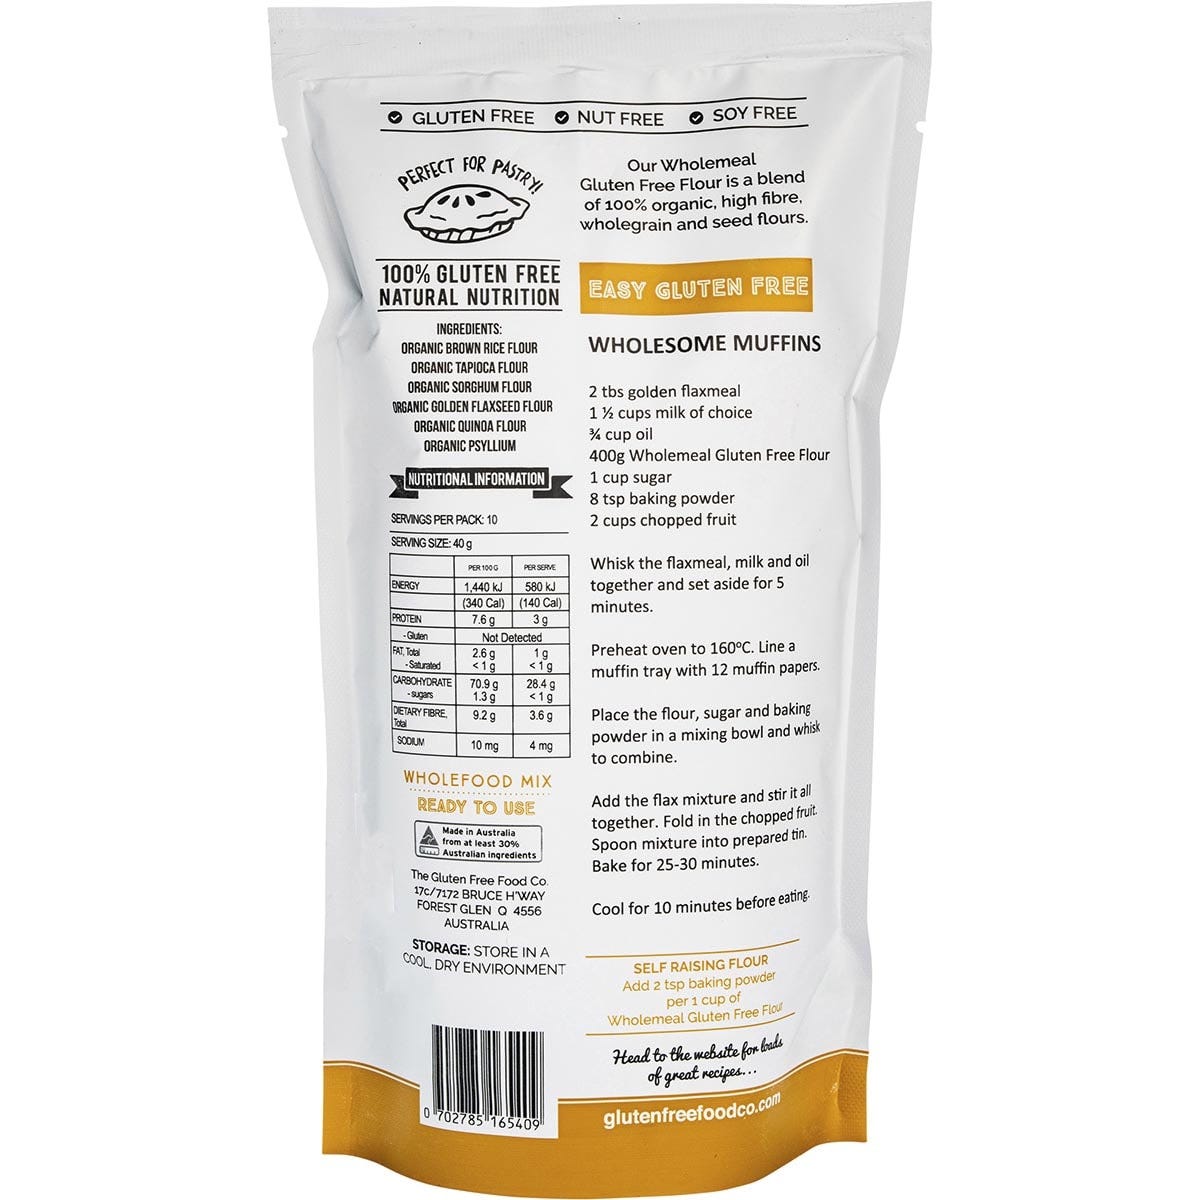 The Gluten Free Food Co. Wholemeal Flour Blend Mix